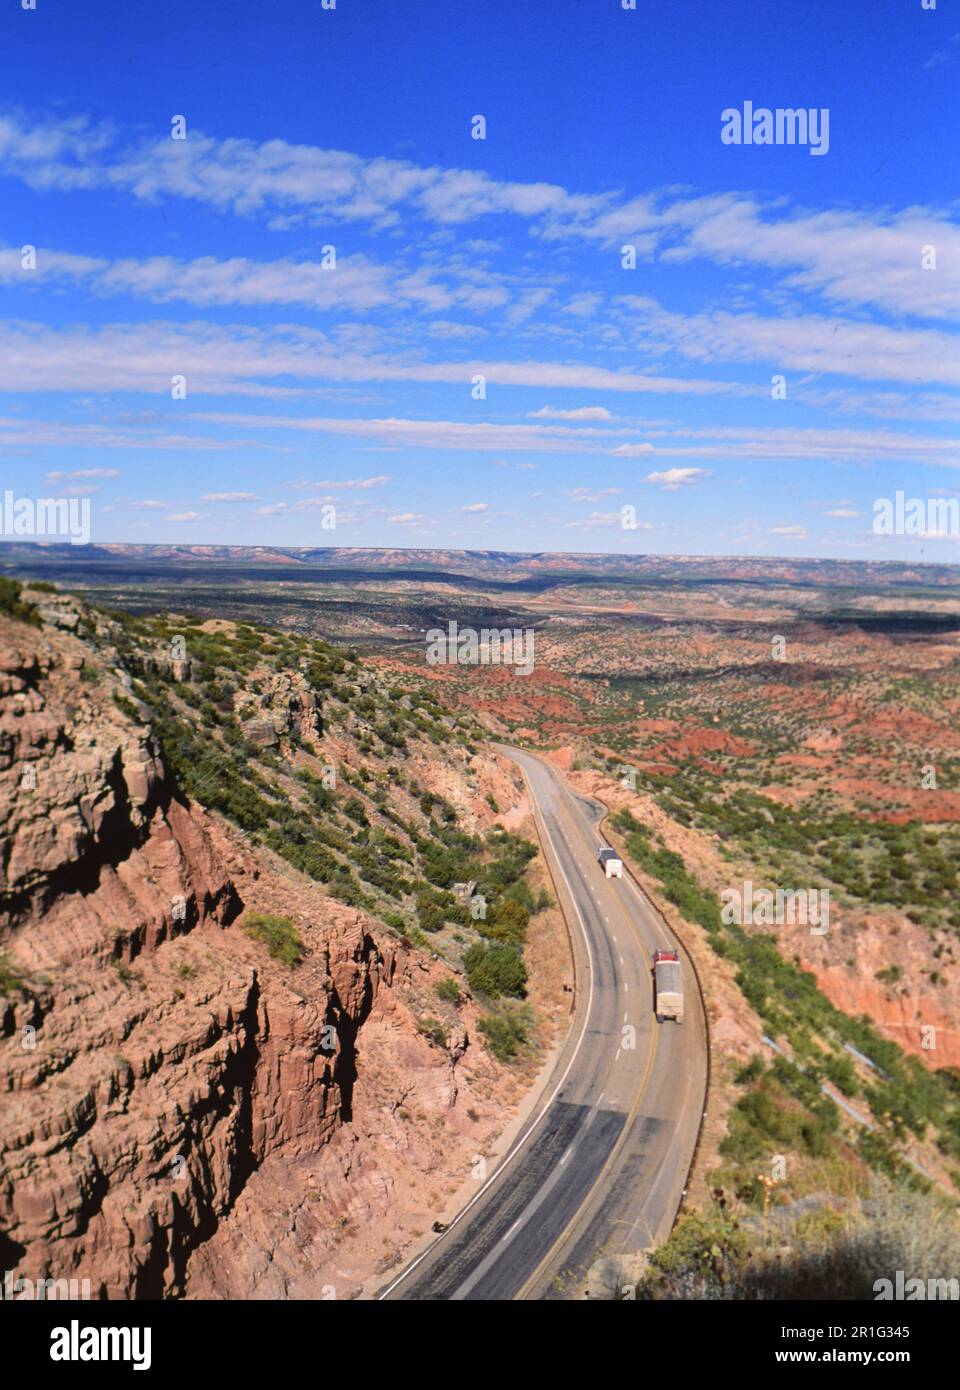 Two semi-trucks and trailers driving through Palo Duro Canyon in Texas  ca. 2000 Stock Photo